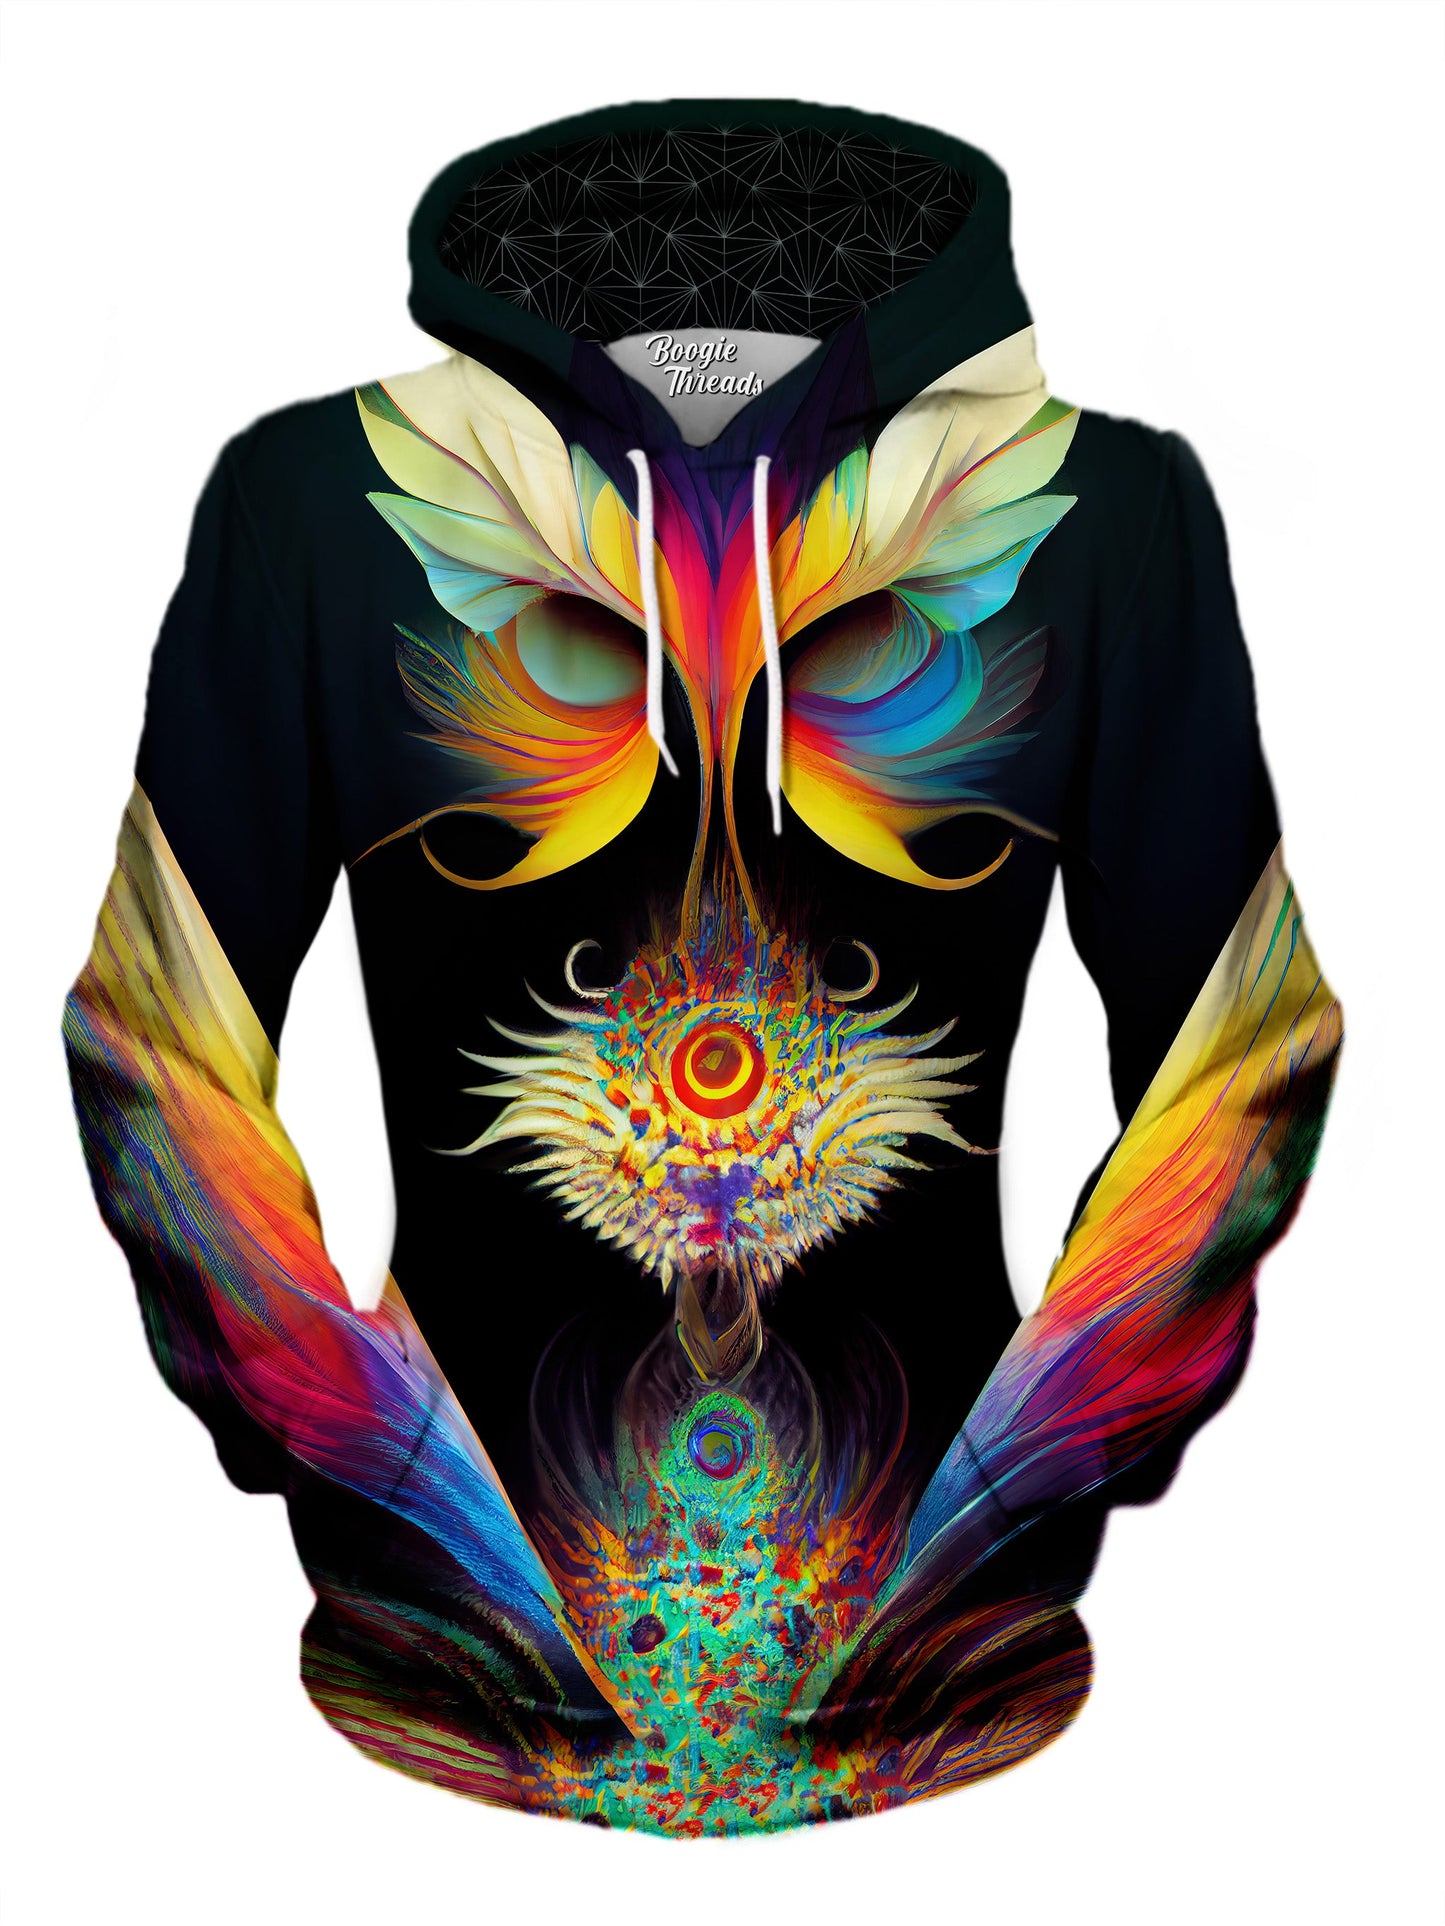 Unwritten Invention Unisex Pullover Hoodie - EDM Festival Clothing - Boogie Threads